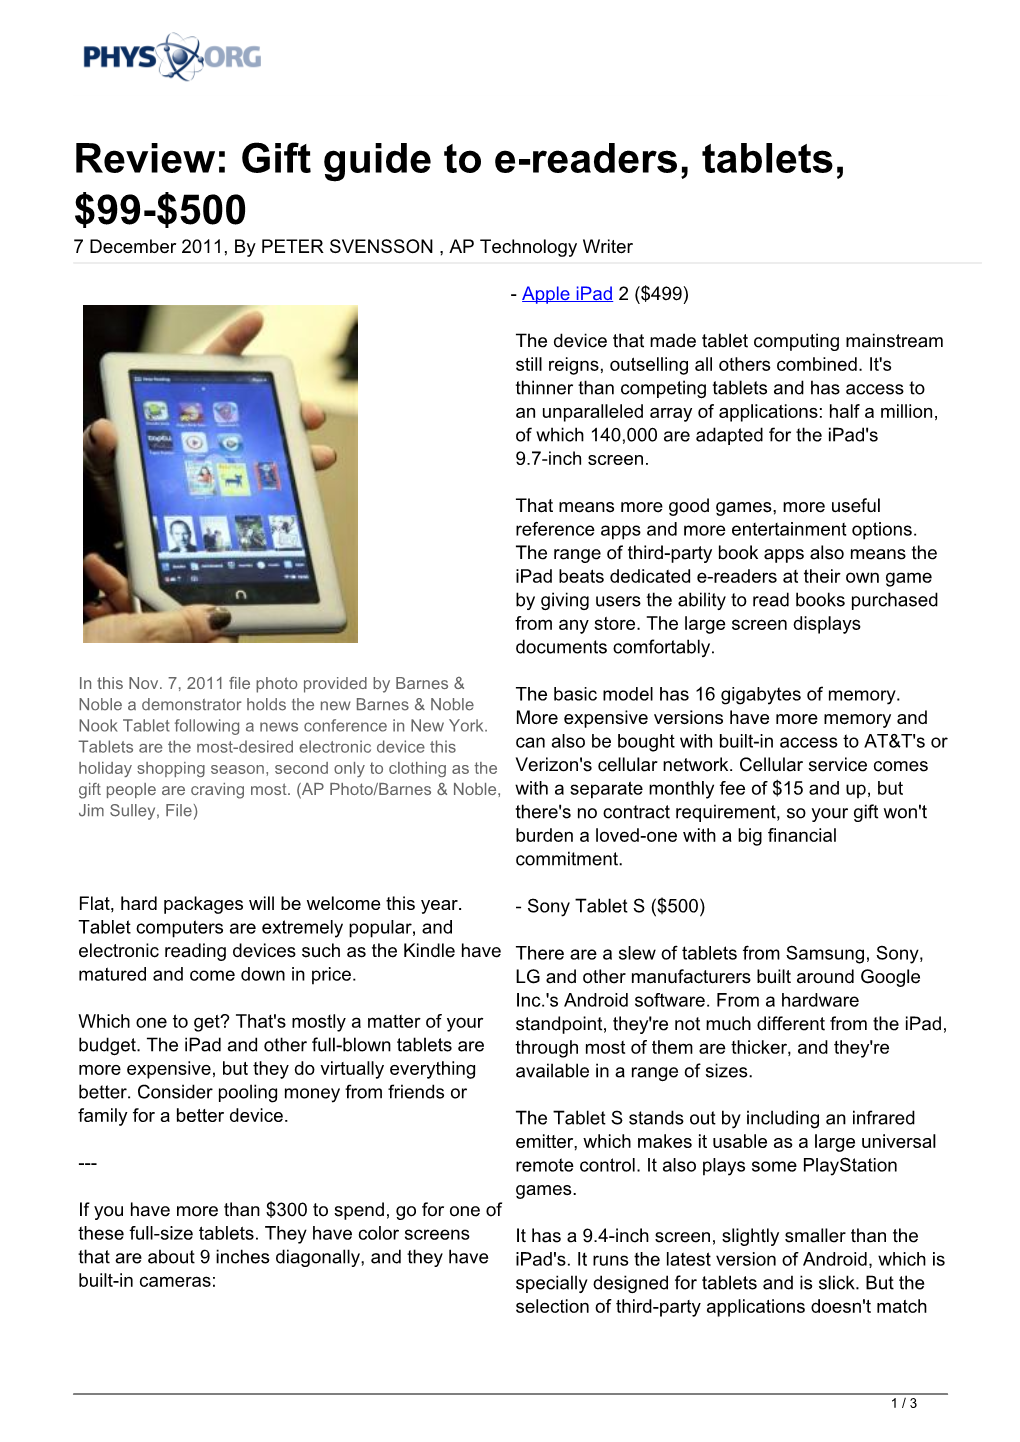 Review: Gift Guide to E-Readers, Tablets, $99-$500 7 December 2011, by PETER SVENSSON , AP Technology Writer